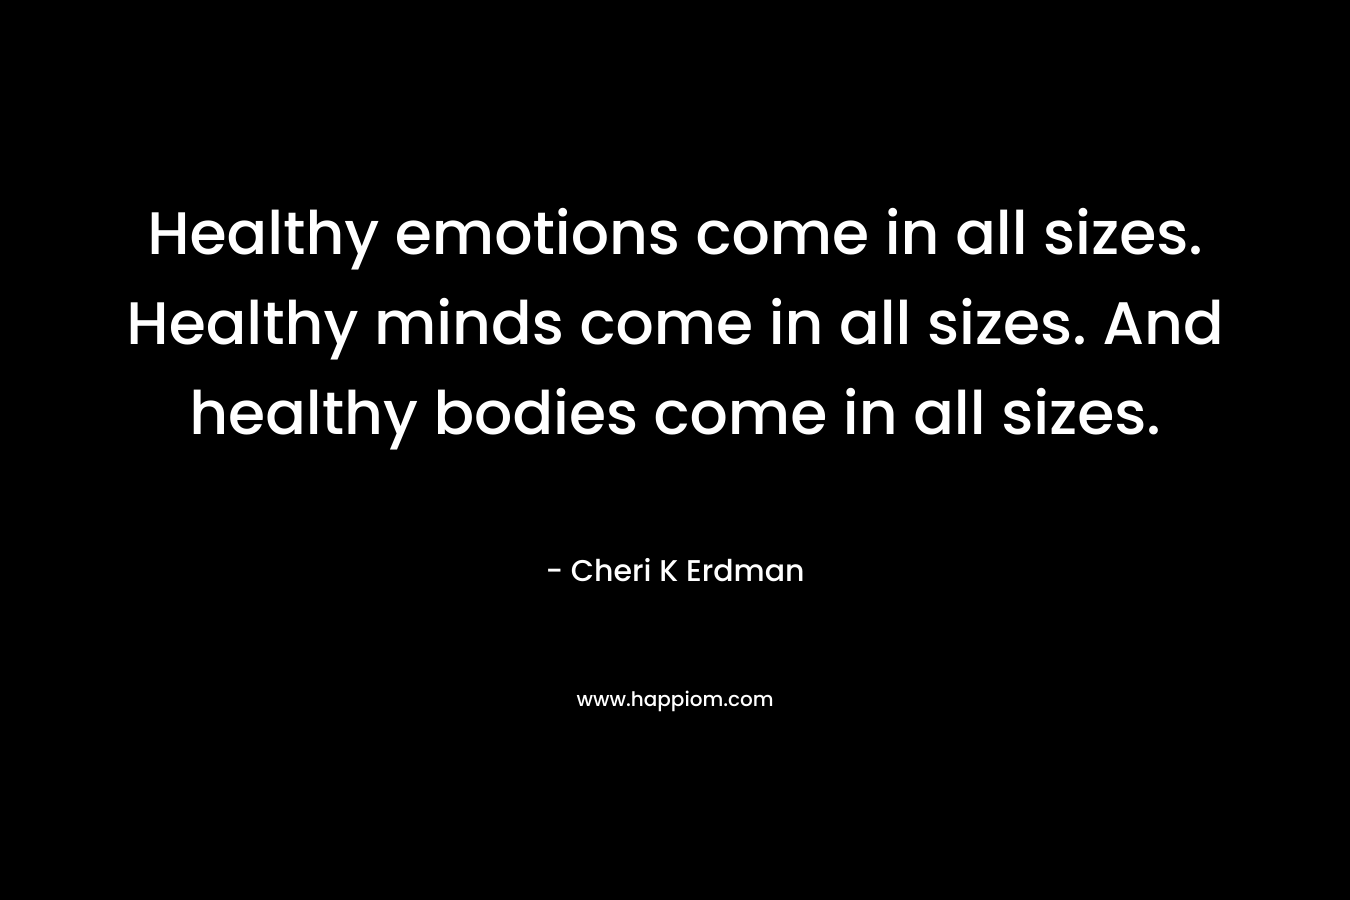 Healthy emotions come in all sizes. Healthy minds come in all sizes. And healthy bodies come in all sizes.